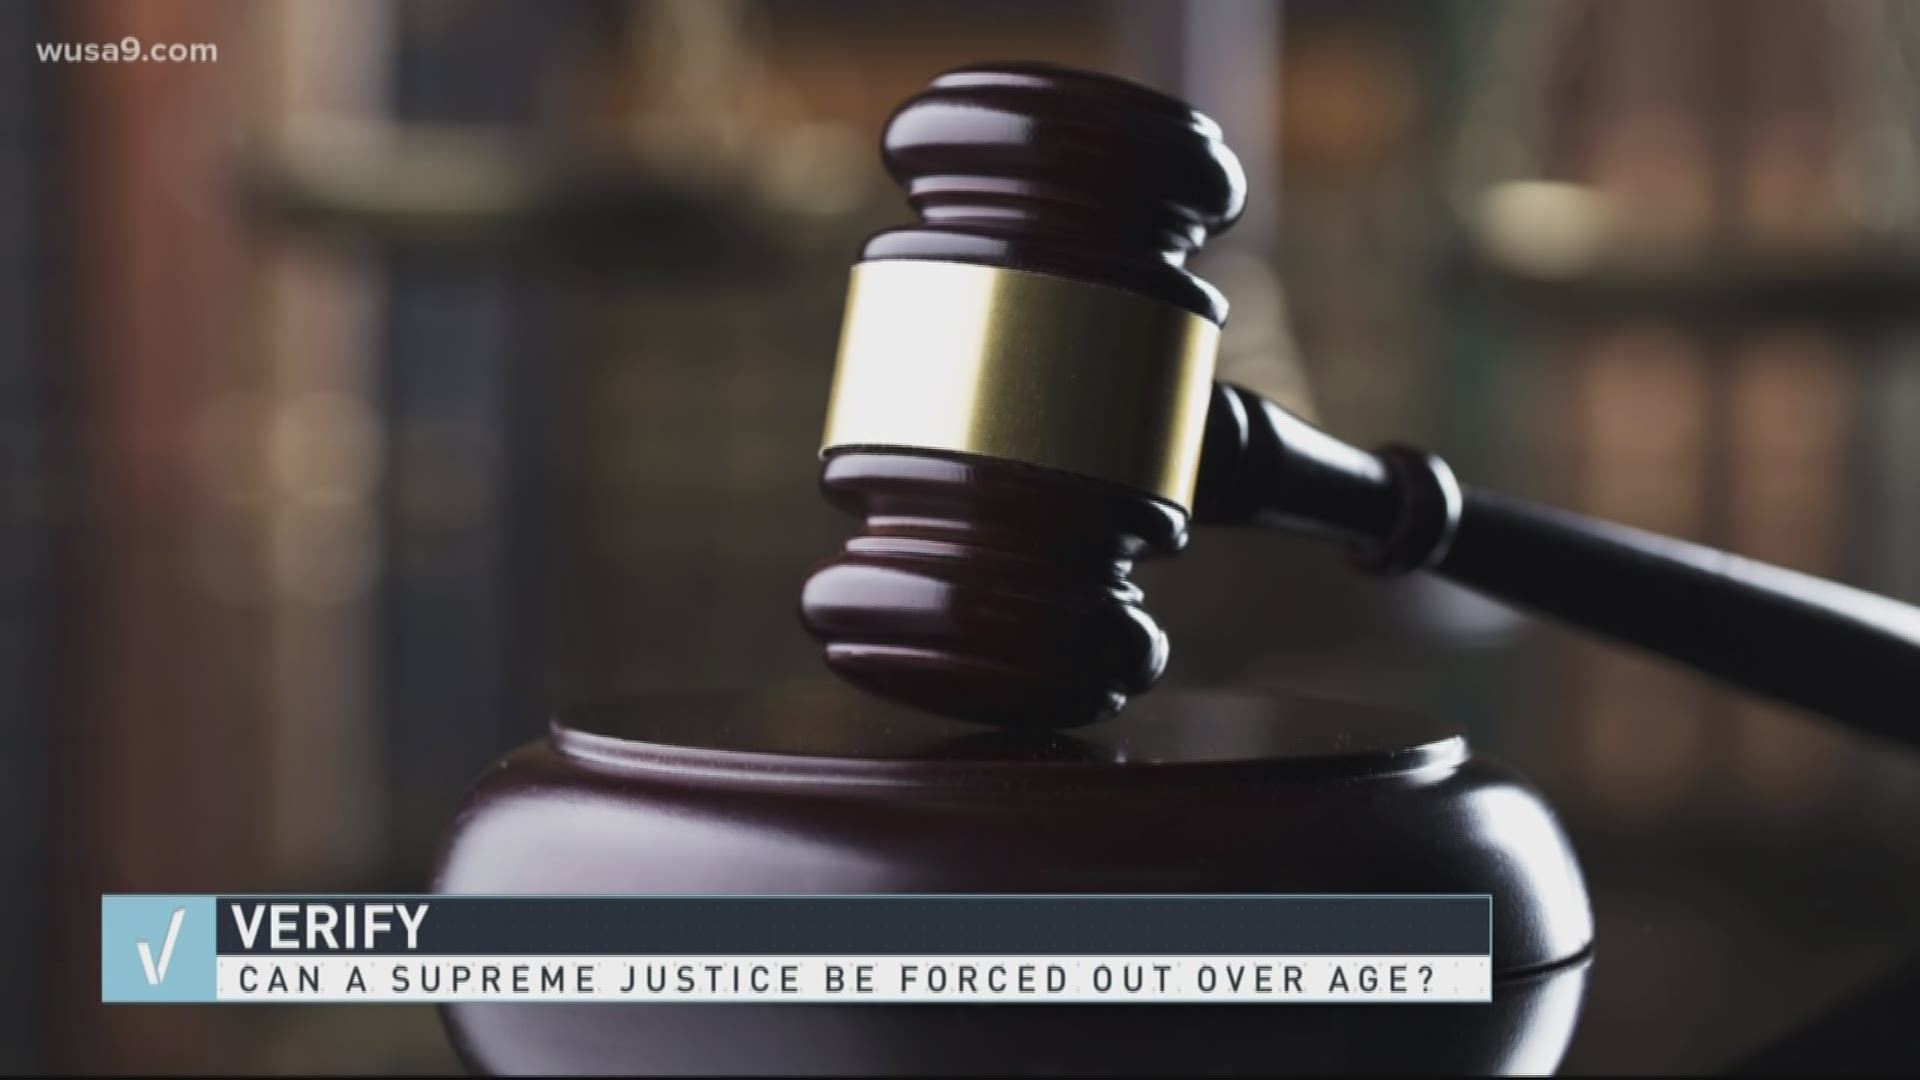 A Verify viewer asked whether a Supreme Justice could be forced out after they reach a certain age. We went directly to the U.S. Supreme Court for answers.